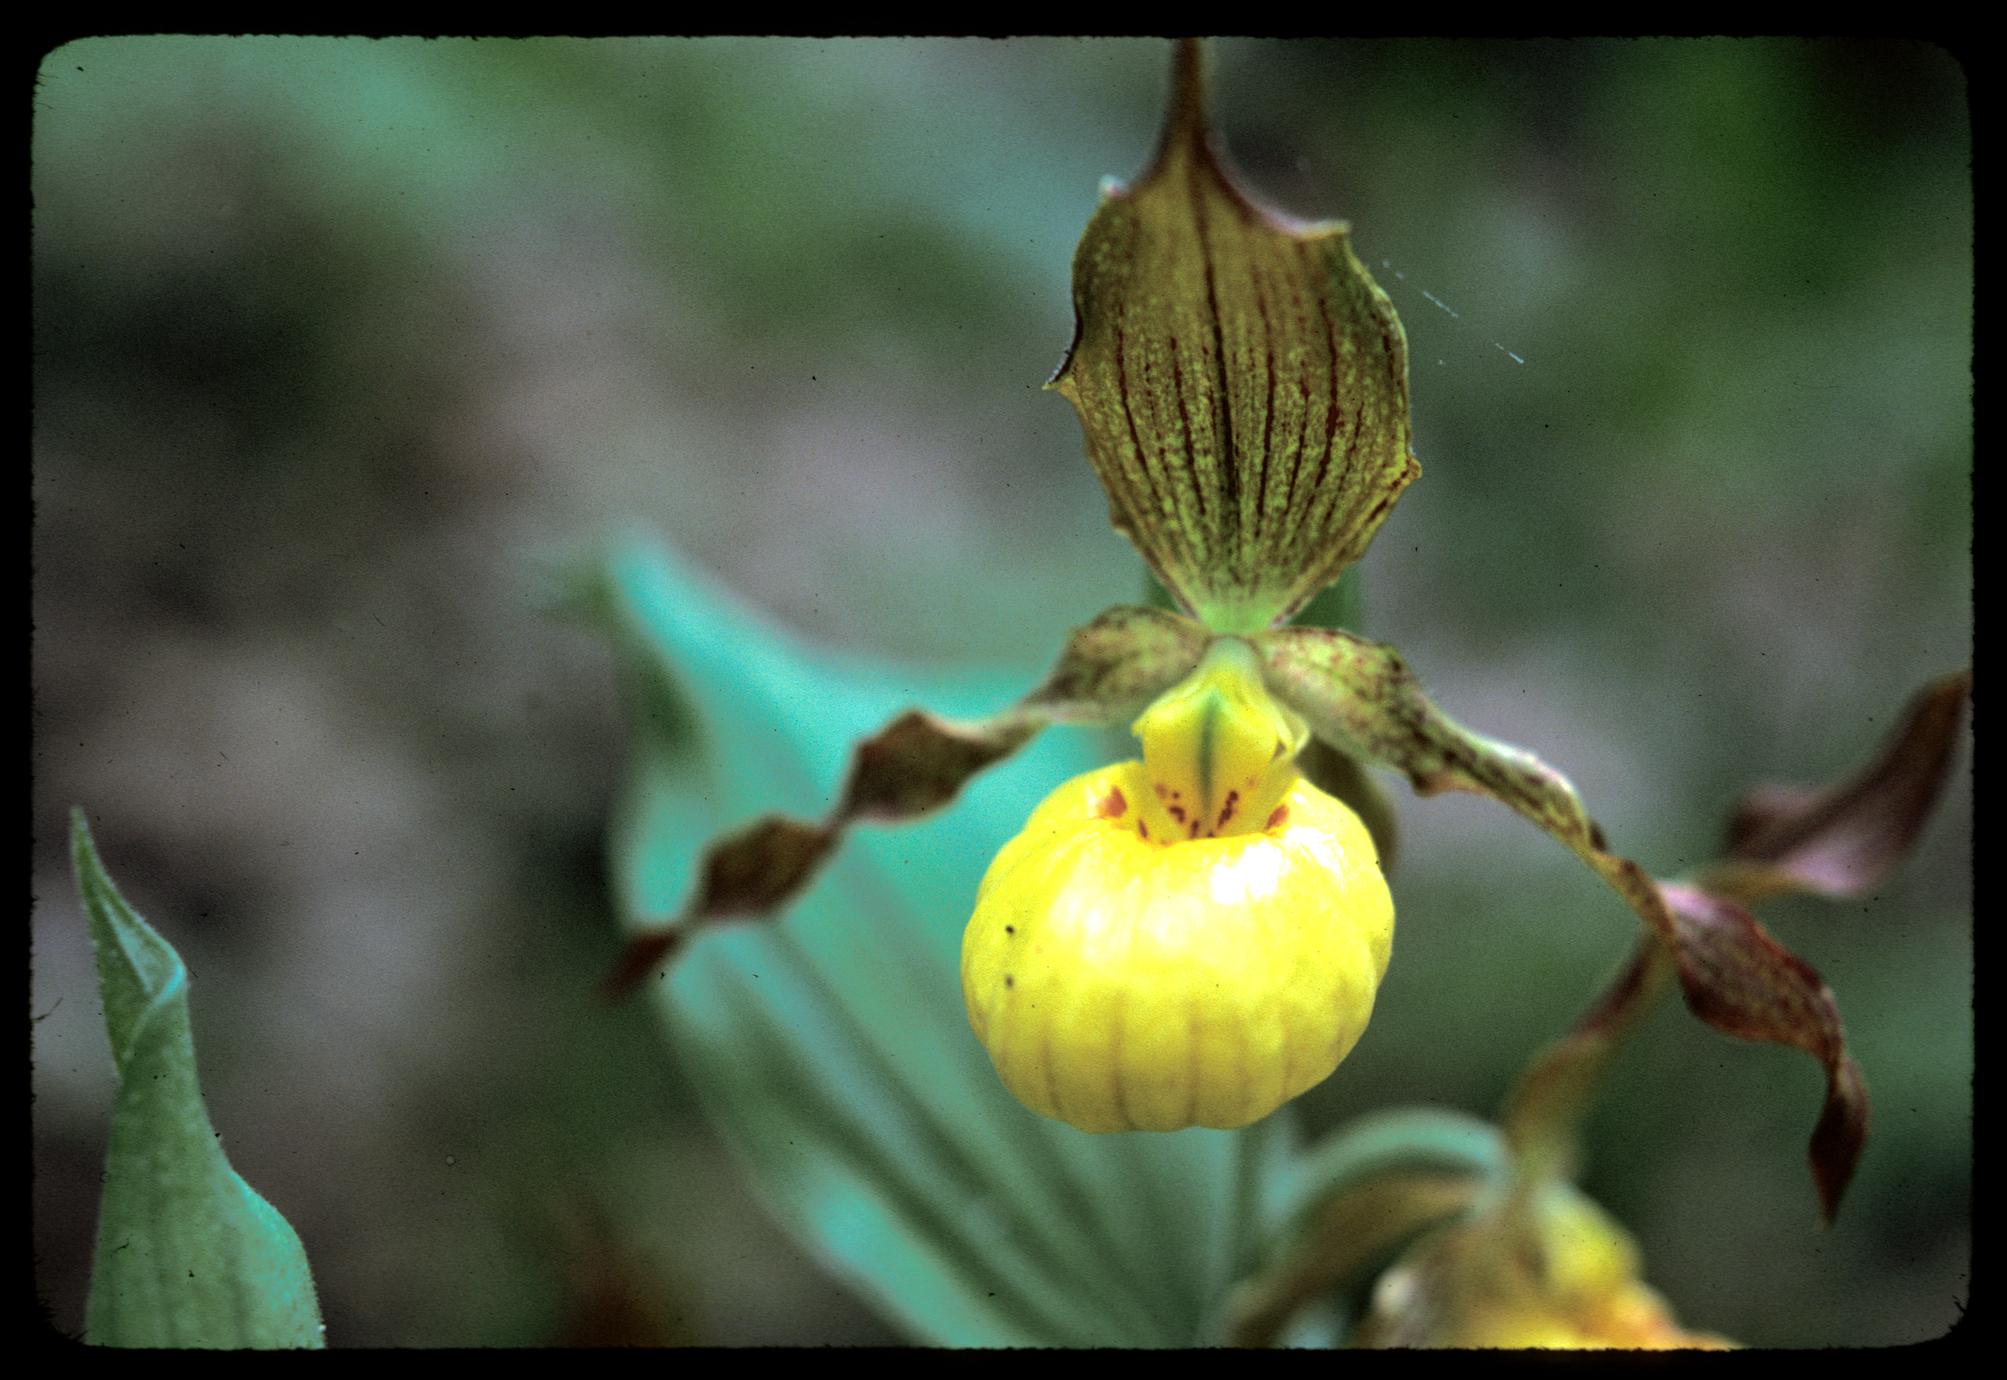 Cypripedium calceolus in bloom at Baxter's Hollow, State Natural Area